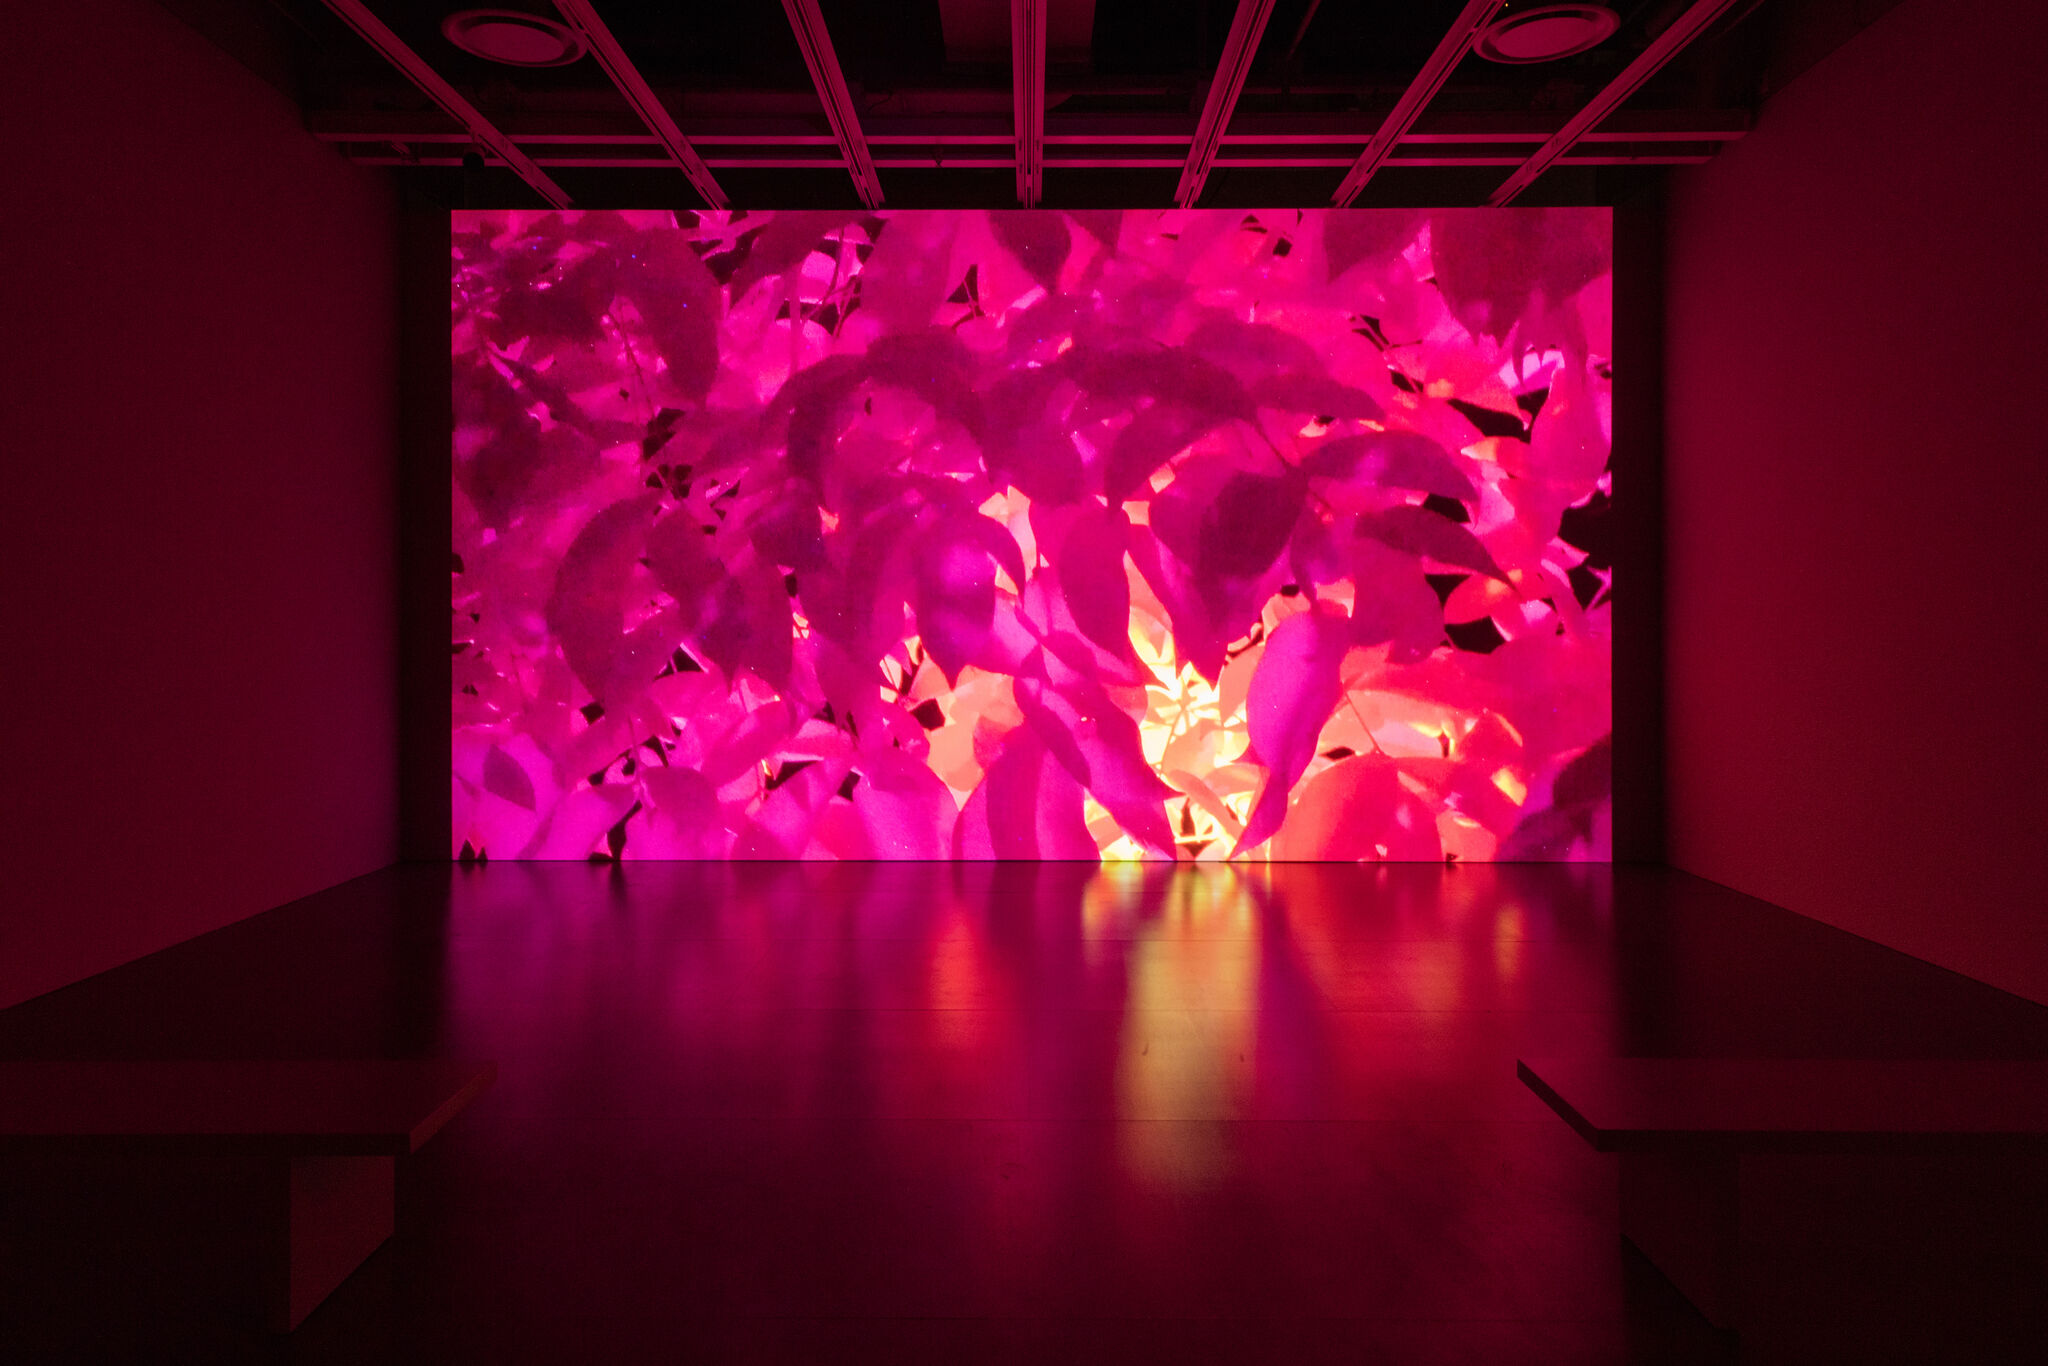 A floor-to-ceiling video screen featuring a still from Madeline Hollander's Flatwing video installation.